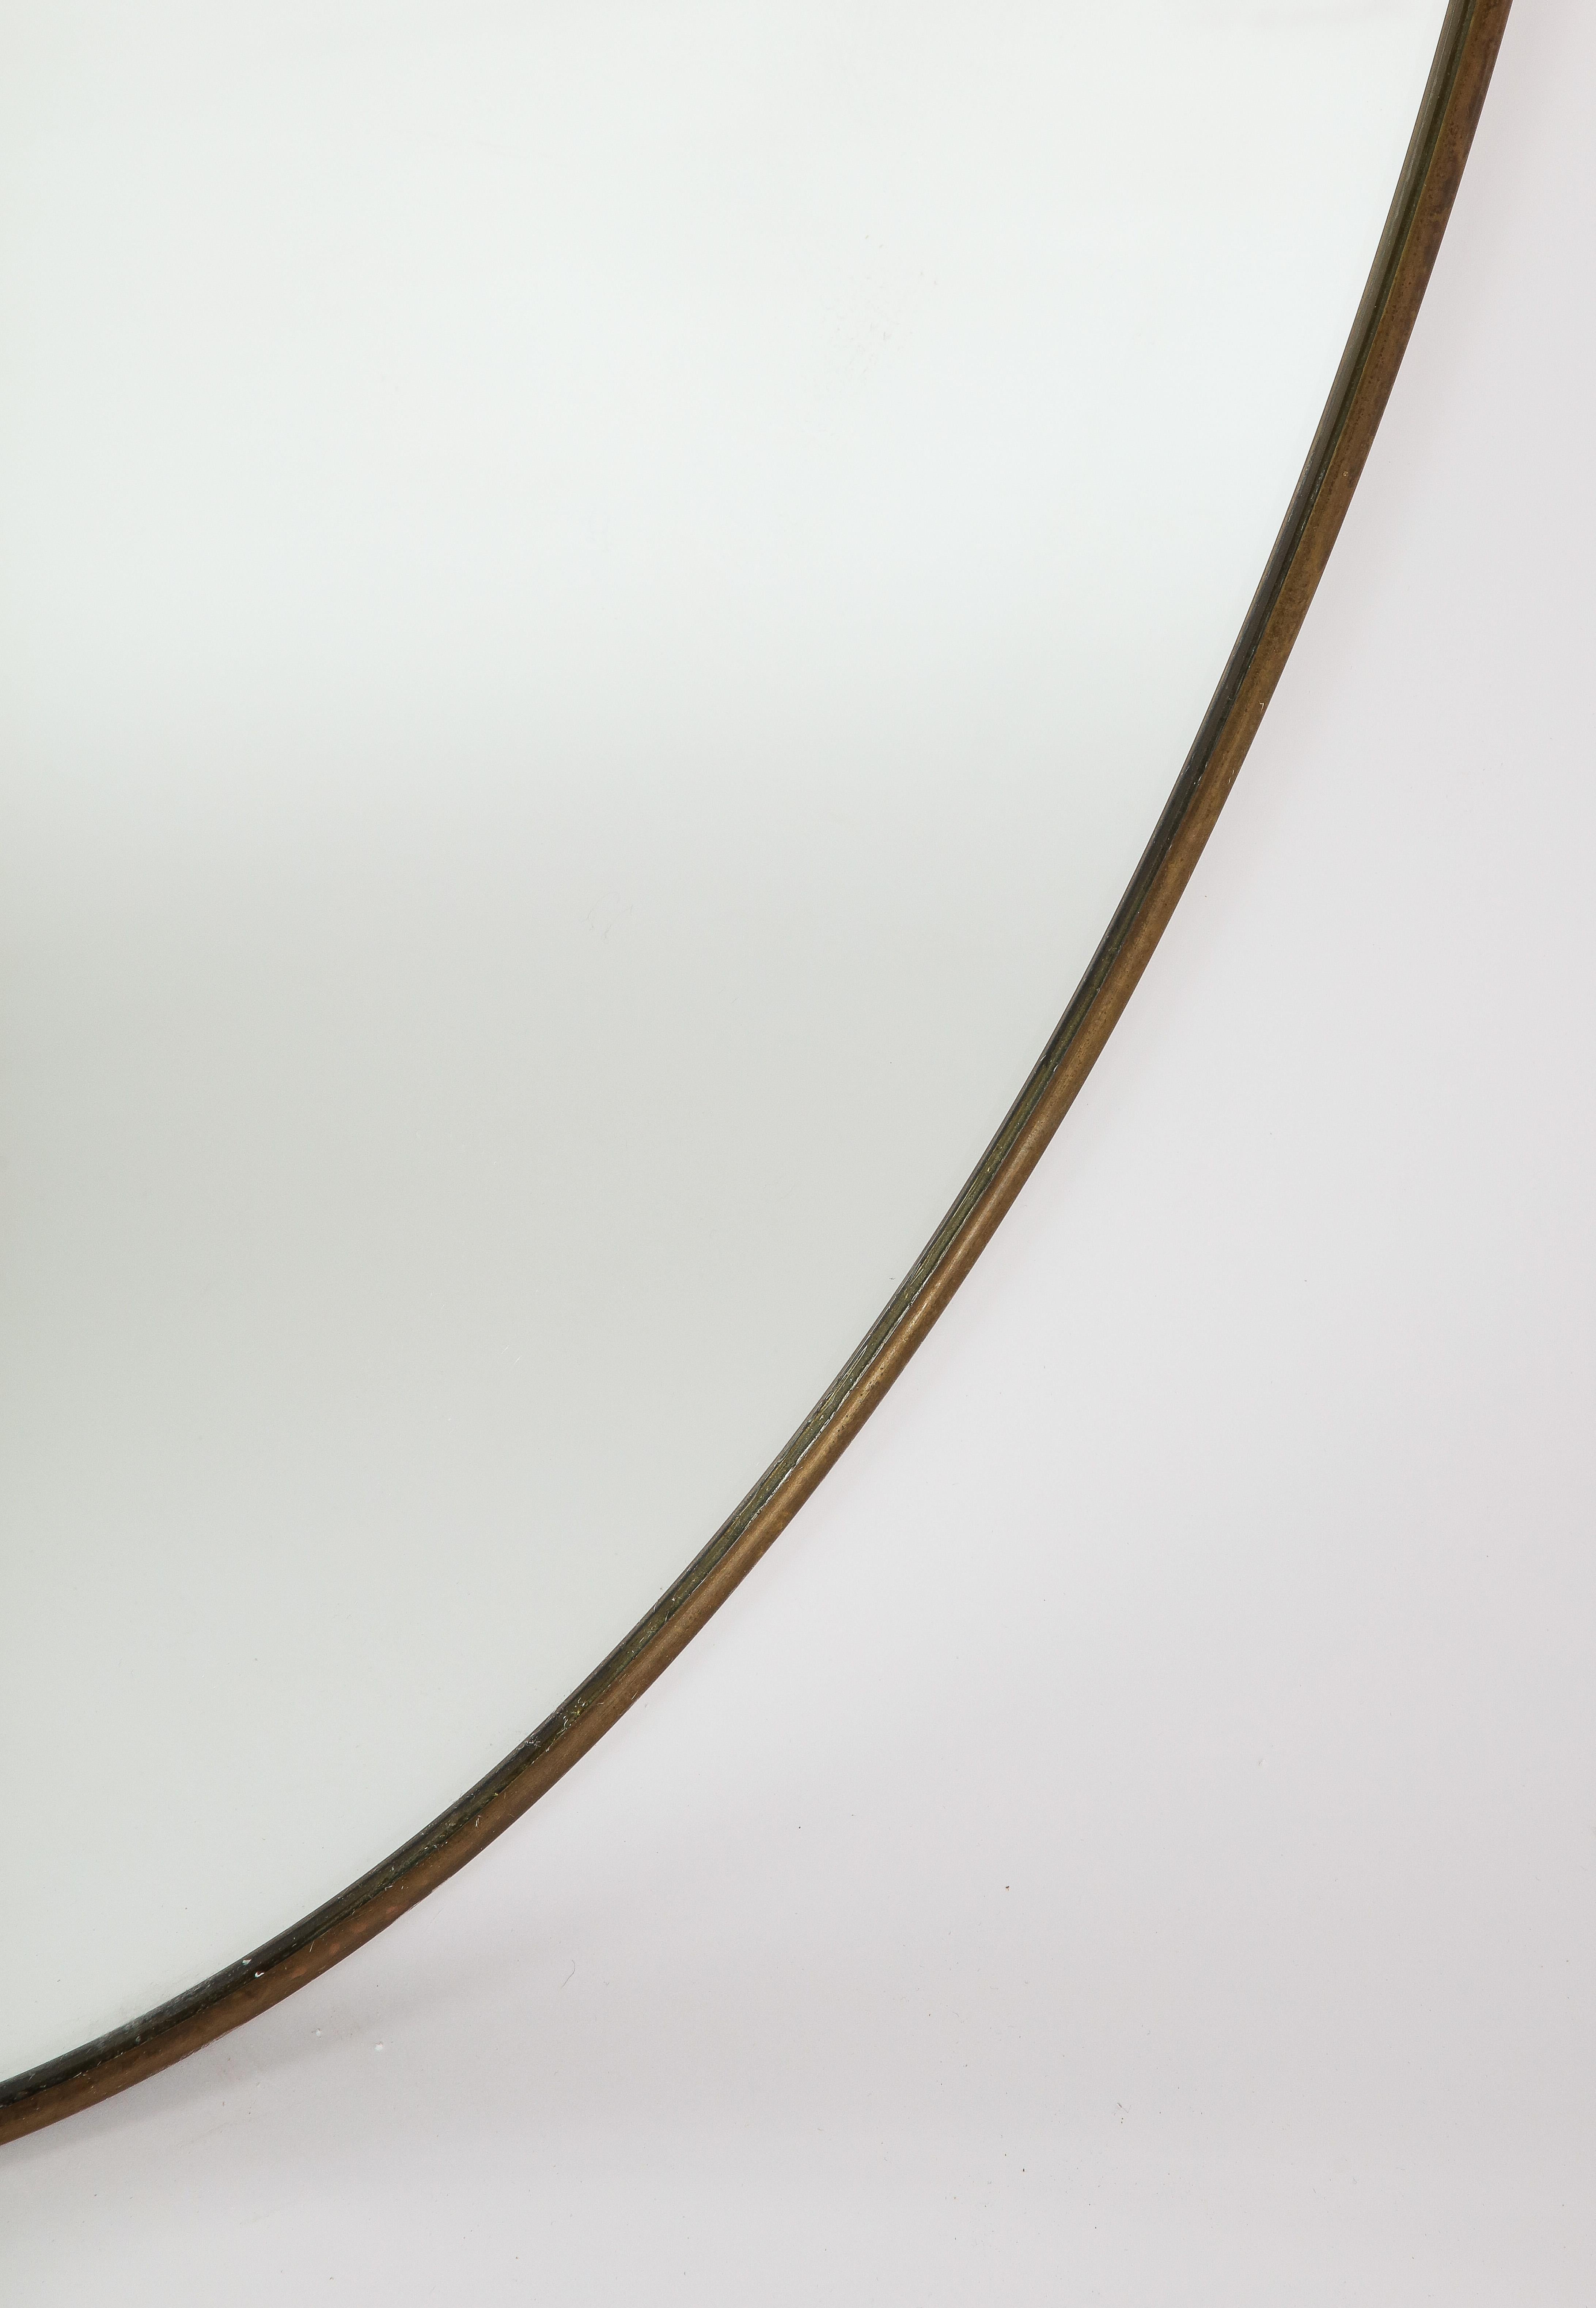 Italian Modernist Brass Oval Grand Scale Wall Mirror, Italy, circa 1950 For Sale 1